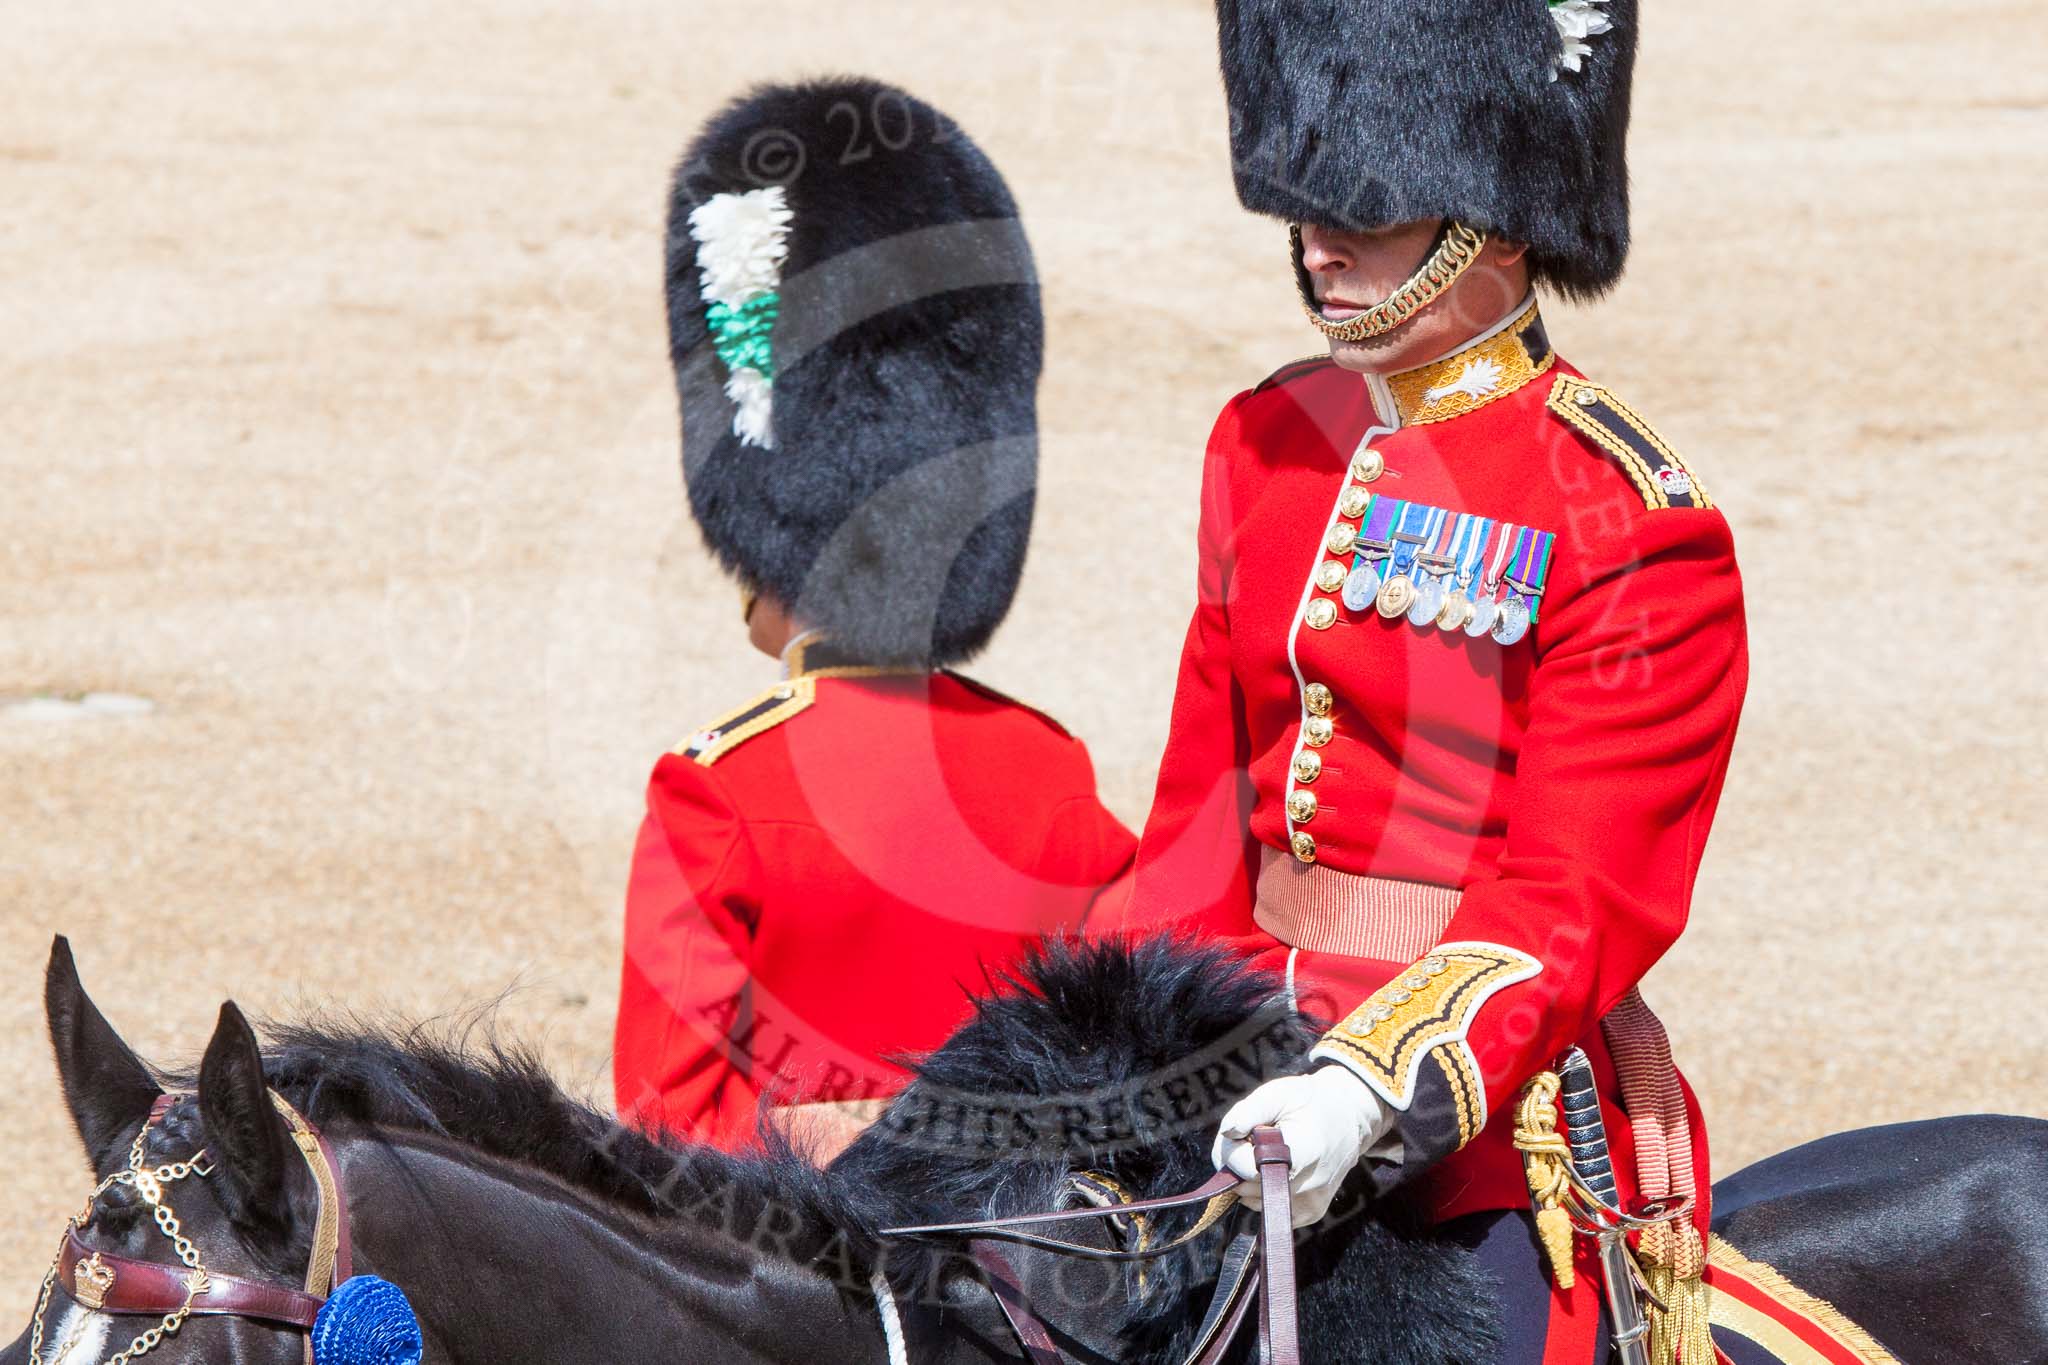 Trooping the Colour 2013: Close-up view of the Major of the Parade, Major H G C Bettinson, Welsh Guards. Image #142, 15 June 2013 10:37 Horse Guards Parade, London, UK